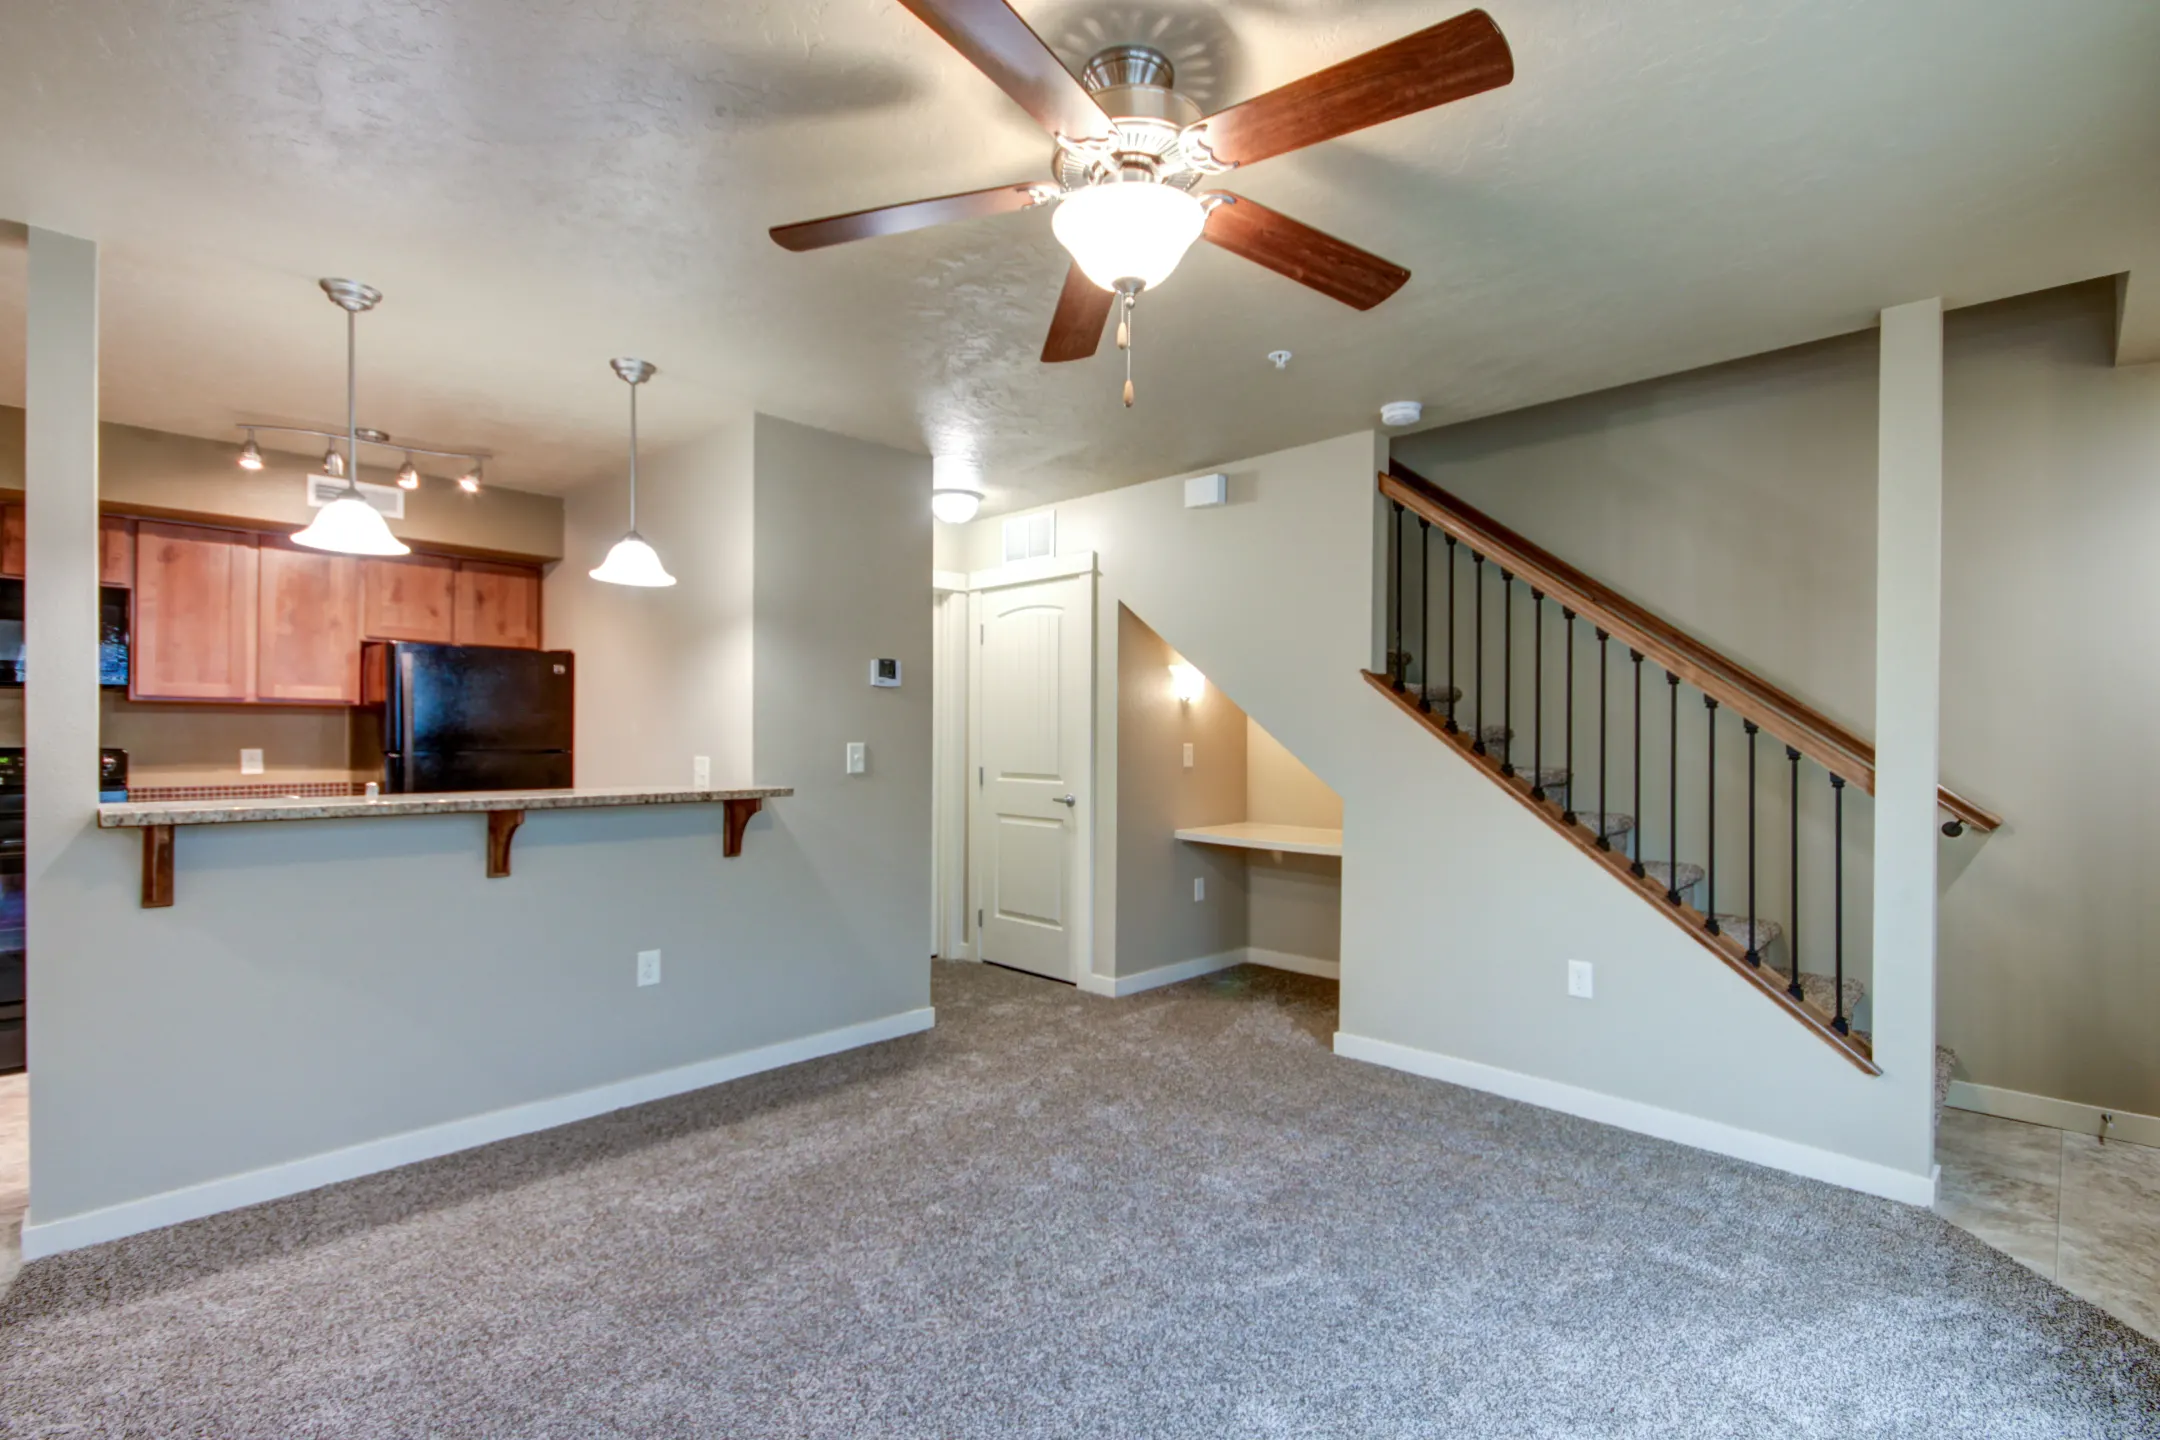 Living Room - Cantabria Townhomes - Boise, ID